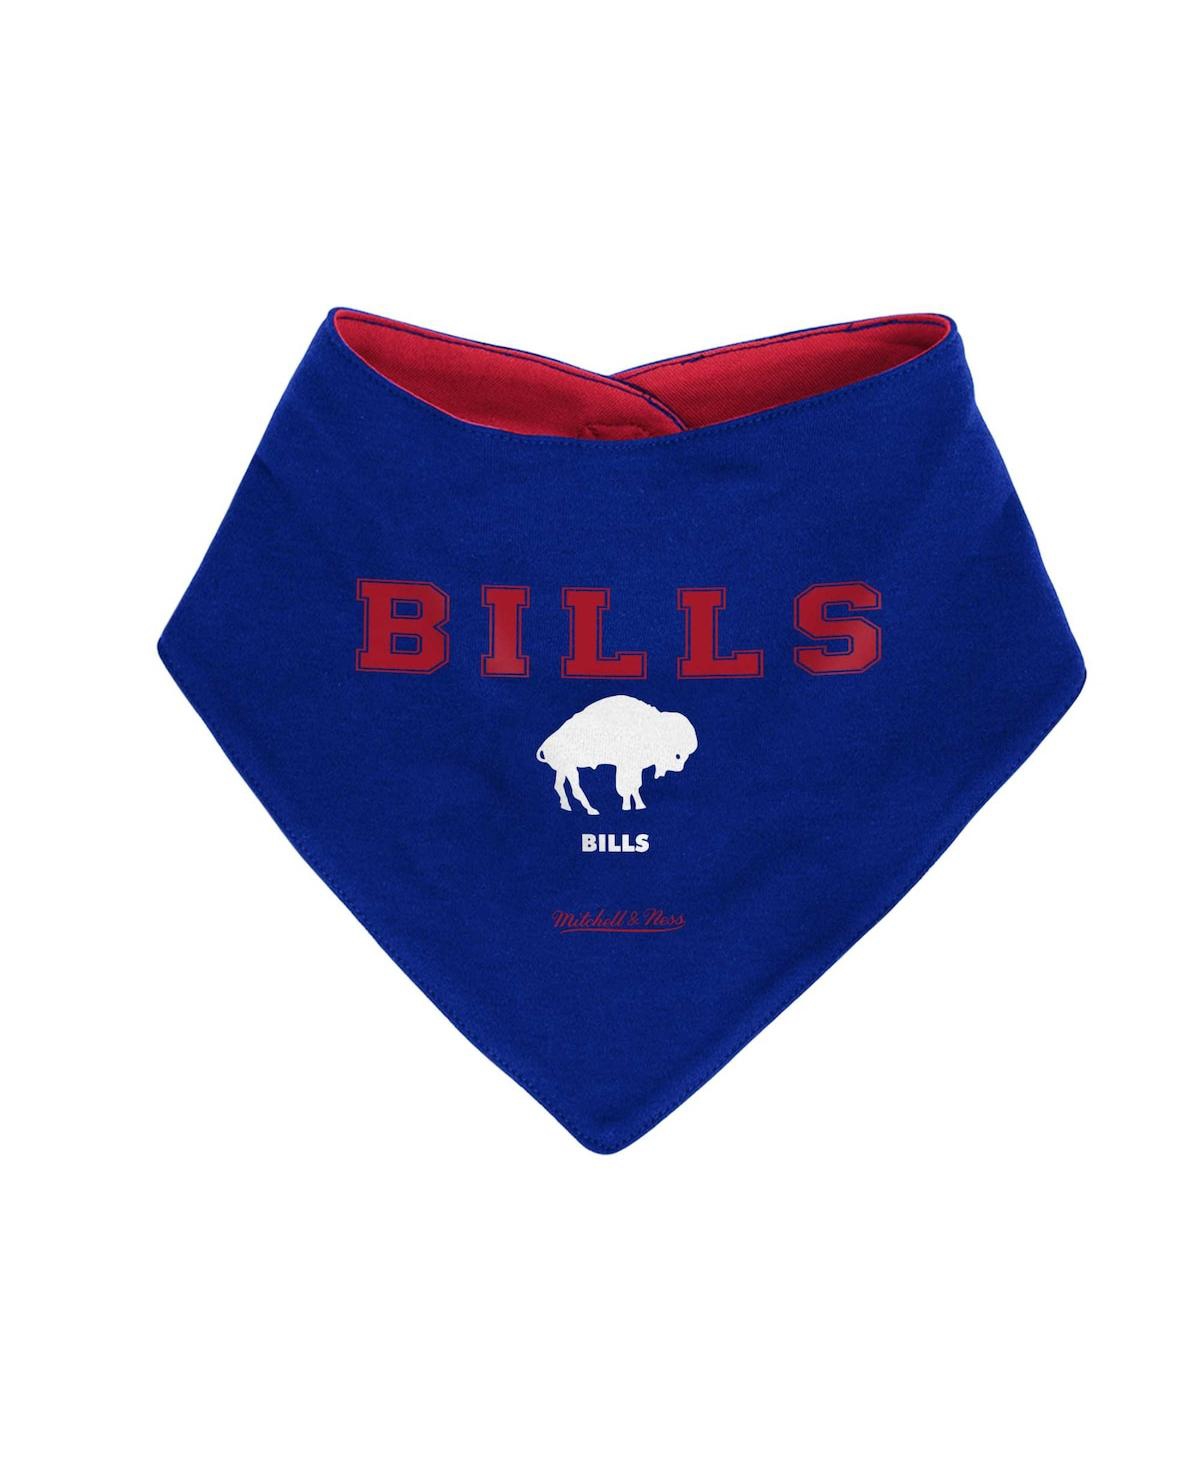 Shop Mitchell & Ness Newborn And Infant Boys And Girls  Royal, Red Buffalo Bills Throwback Bodysuit Bib An In Royal,red